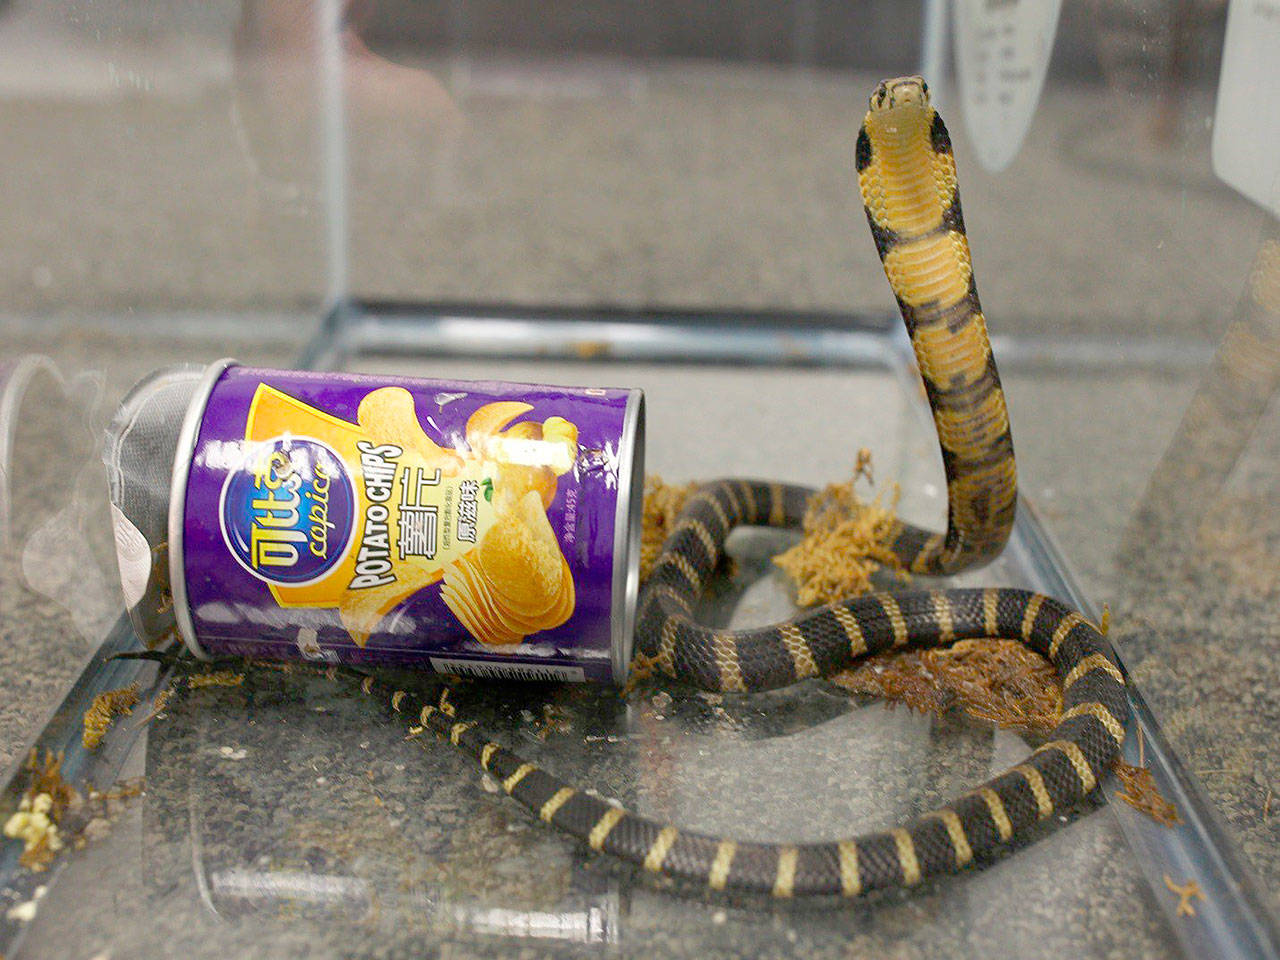 A king cobra beside a potato chip package after it was seized from a package en route to a home in Monterrey Park, Calif. (U.S. Attorney’s Office for the Central District of California)